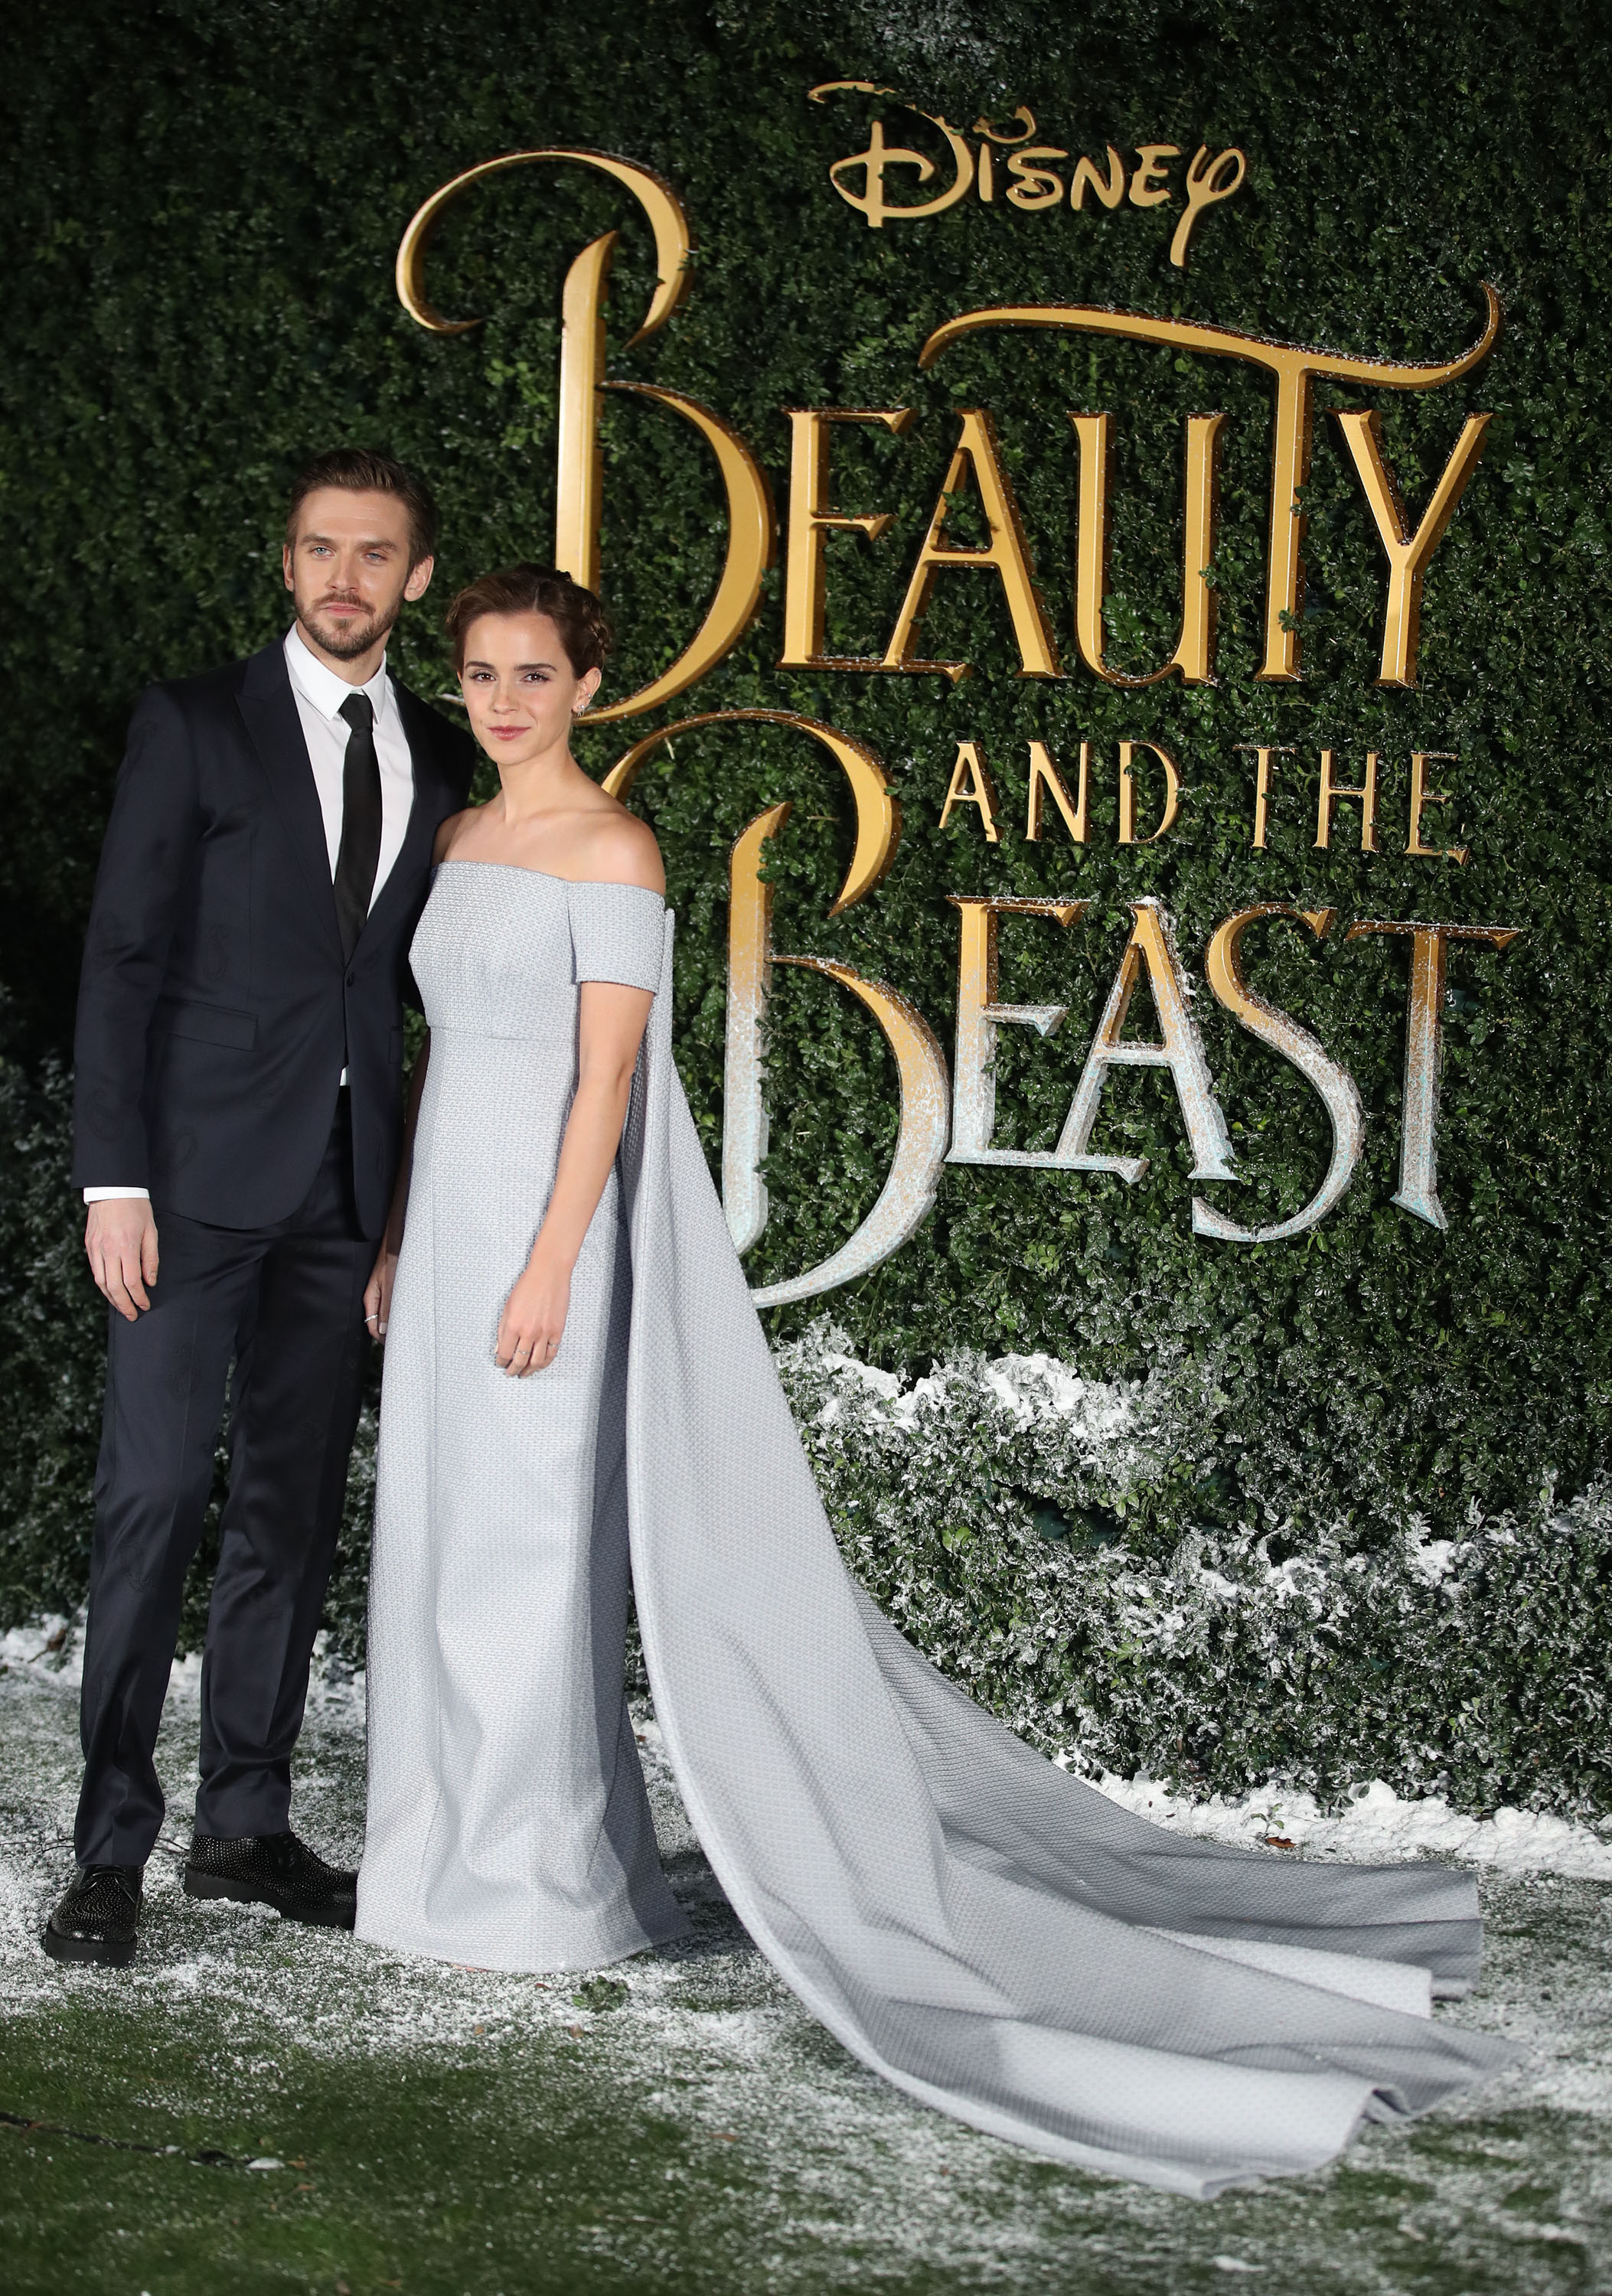 Emma Watson and Dan Stevens attend UK launch event for "Beauty And The Beast"